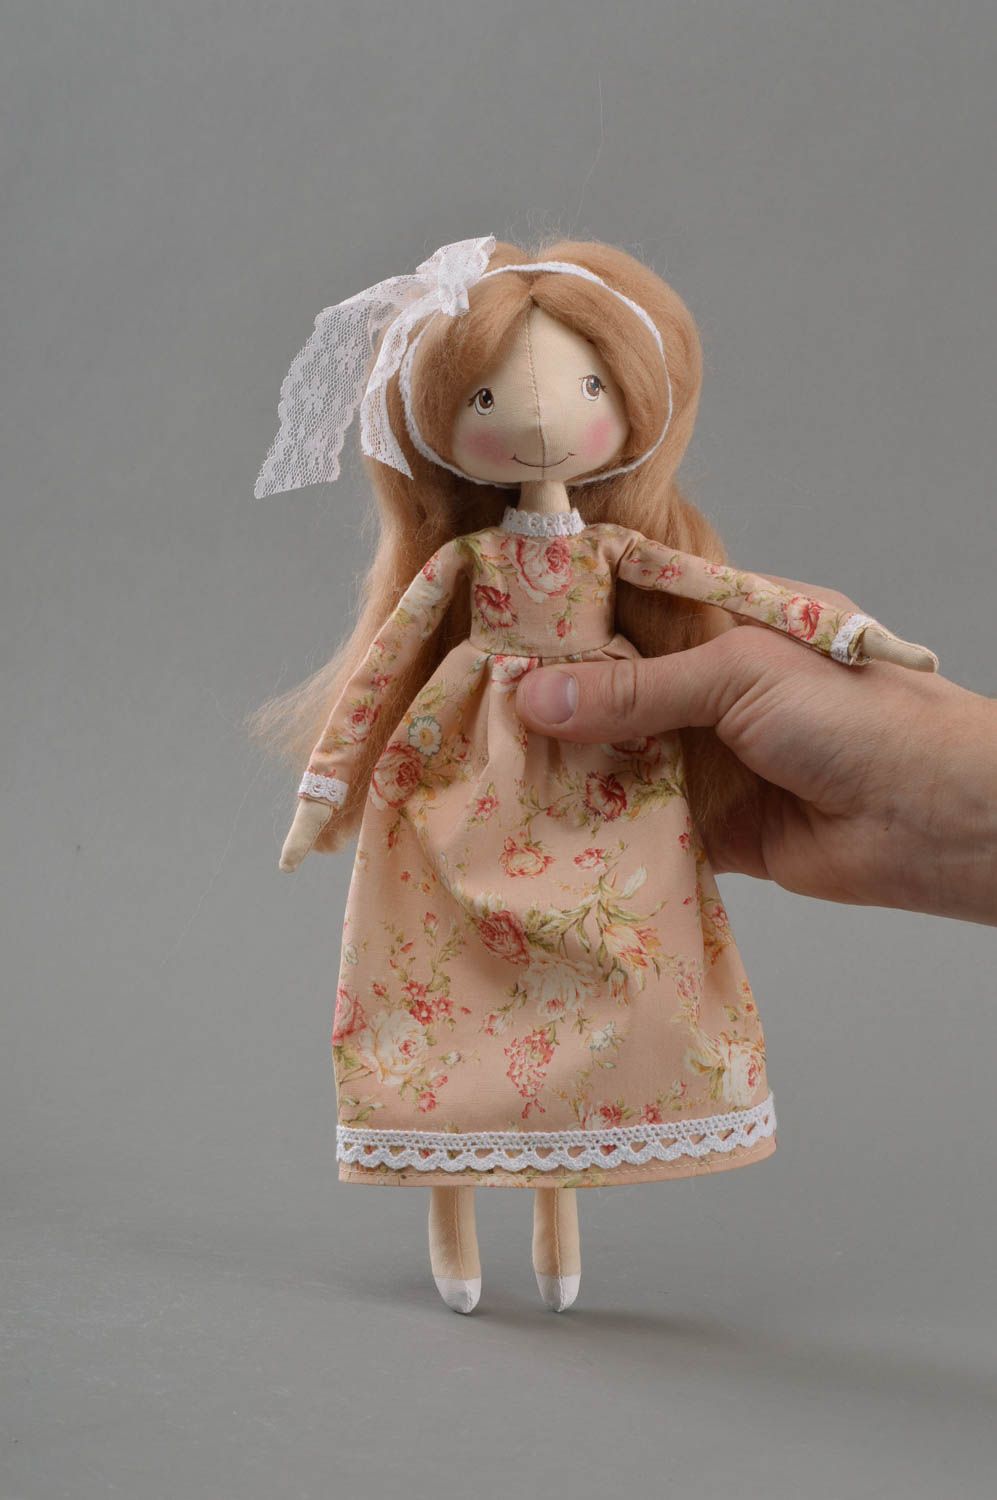 Handmade cute toy doll made of fabric in dress with flower print on stand photo 4